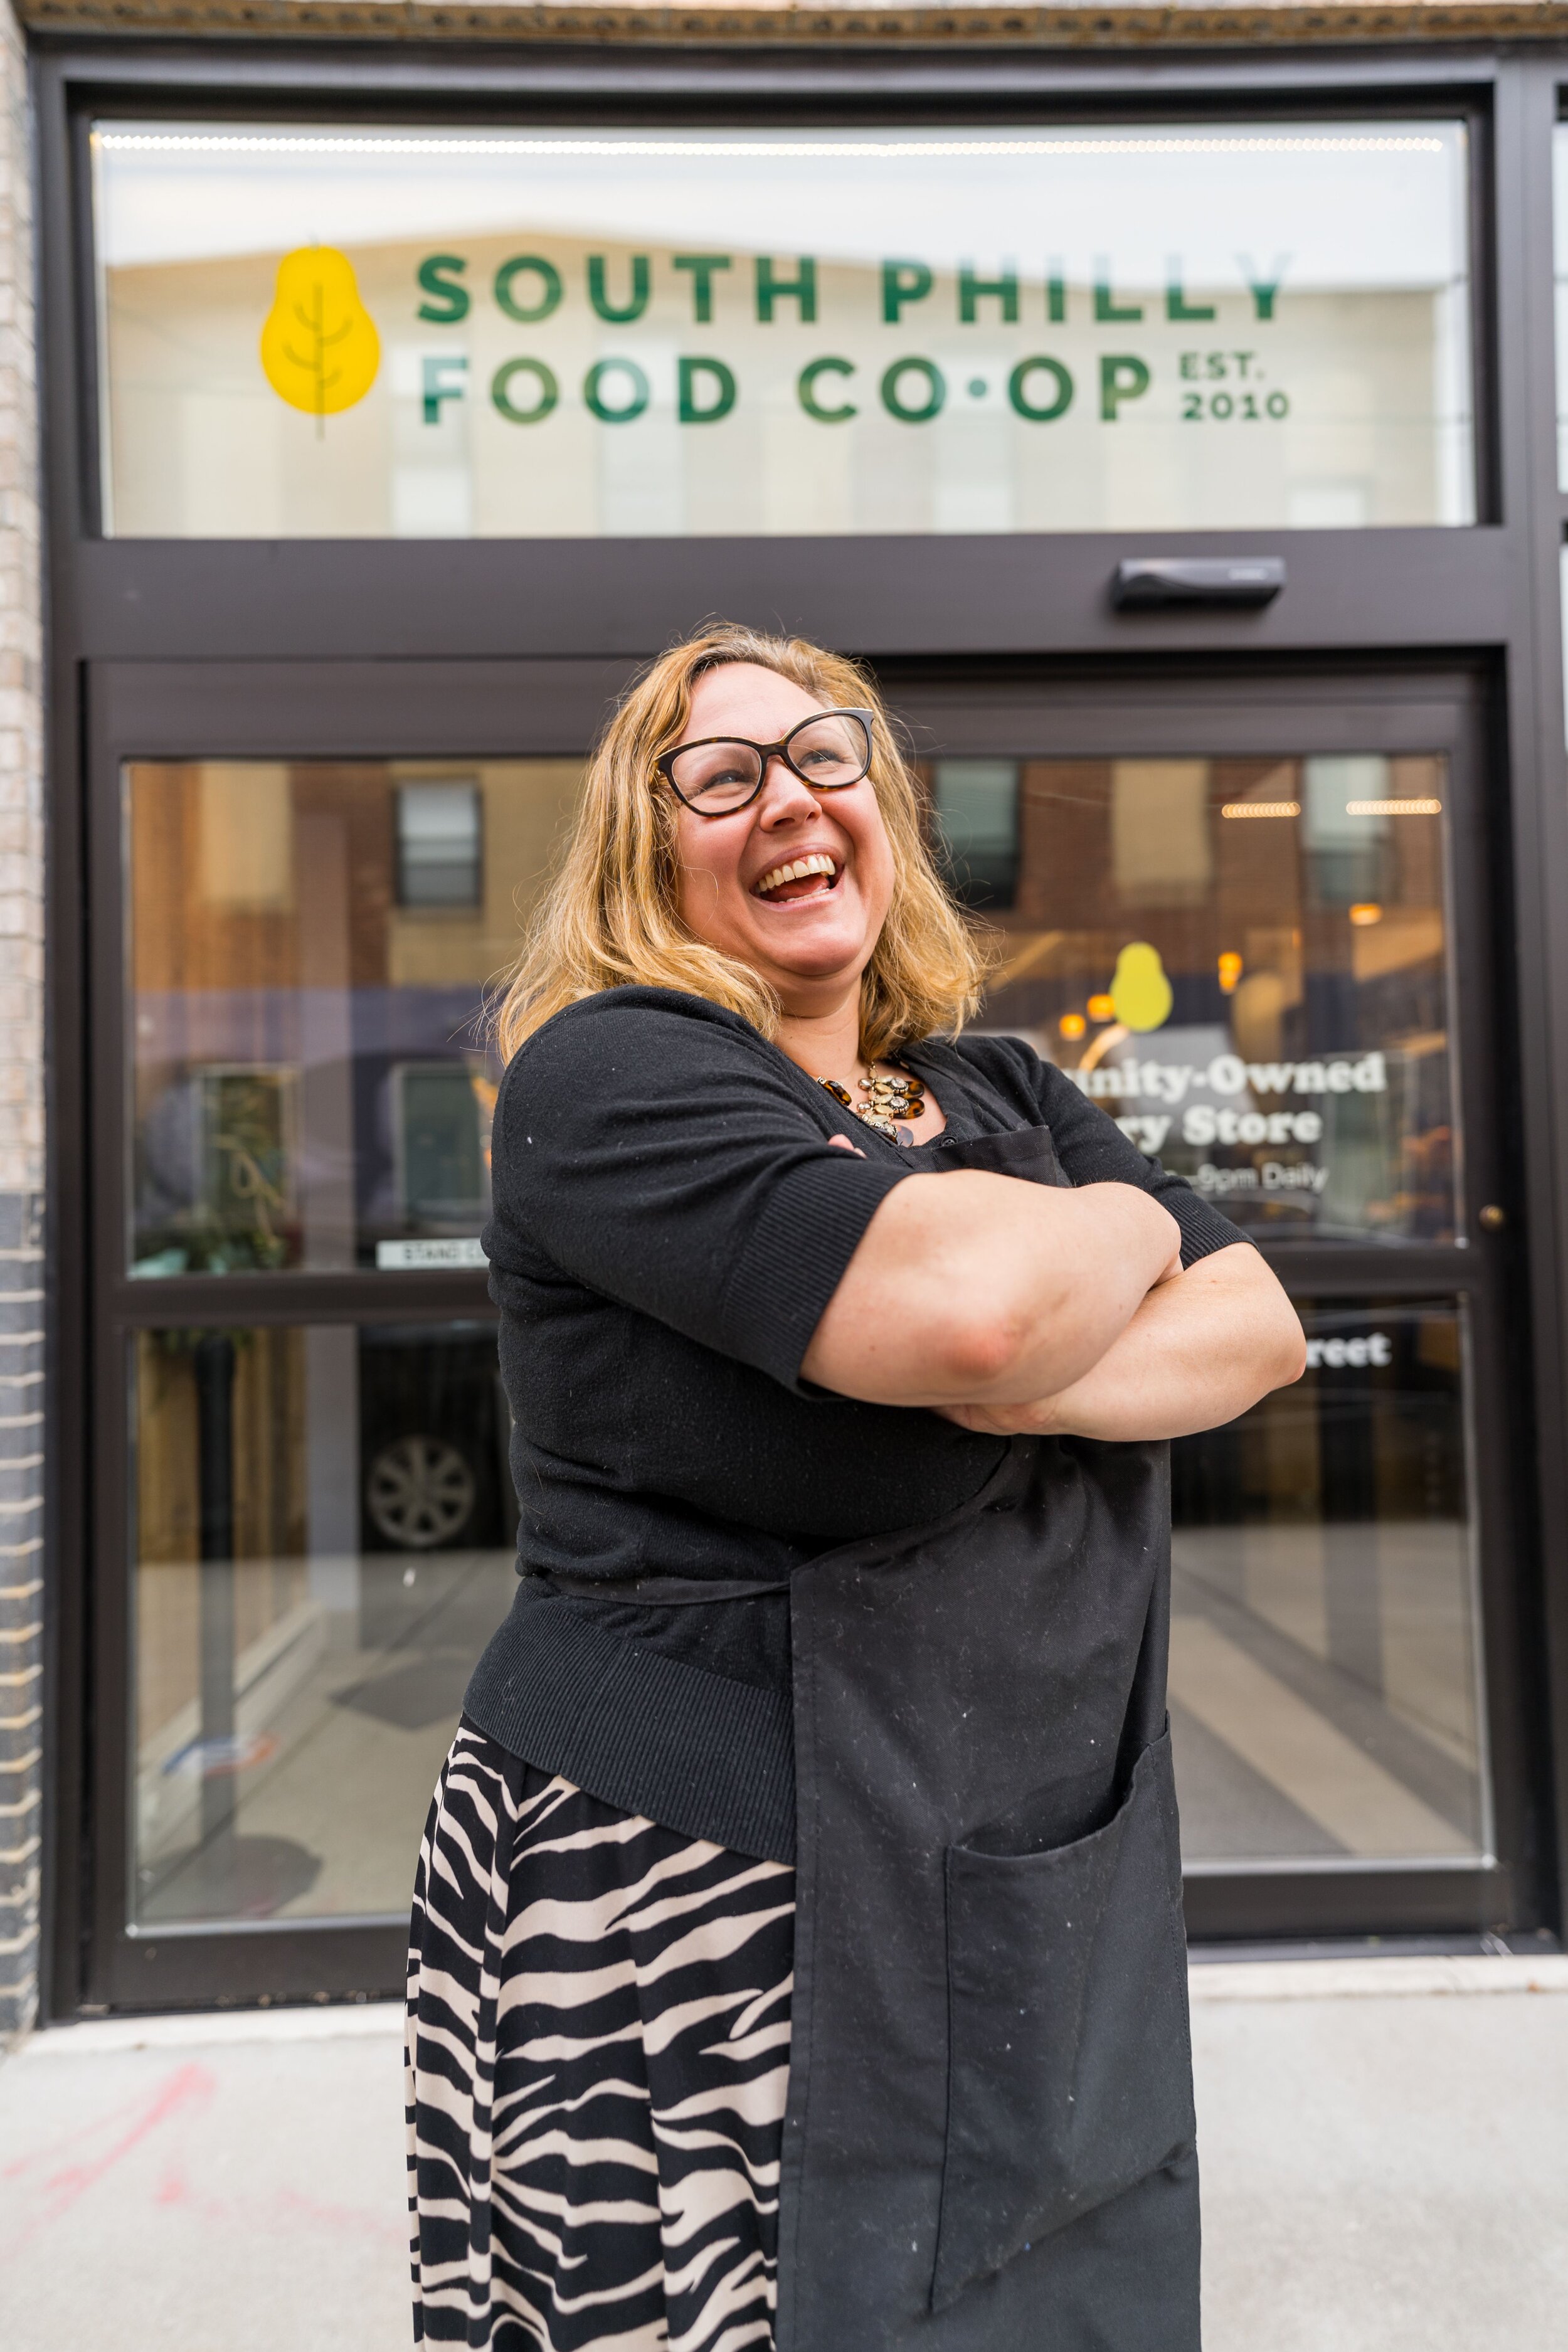 Lori Burge, general manager of the South Philly Food Co-op. Photography by Drew Dennis.